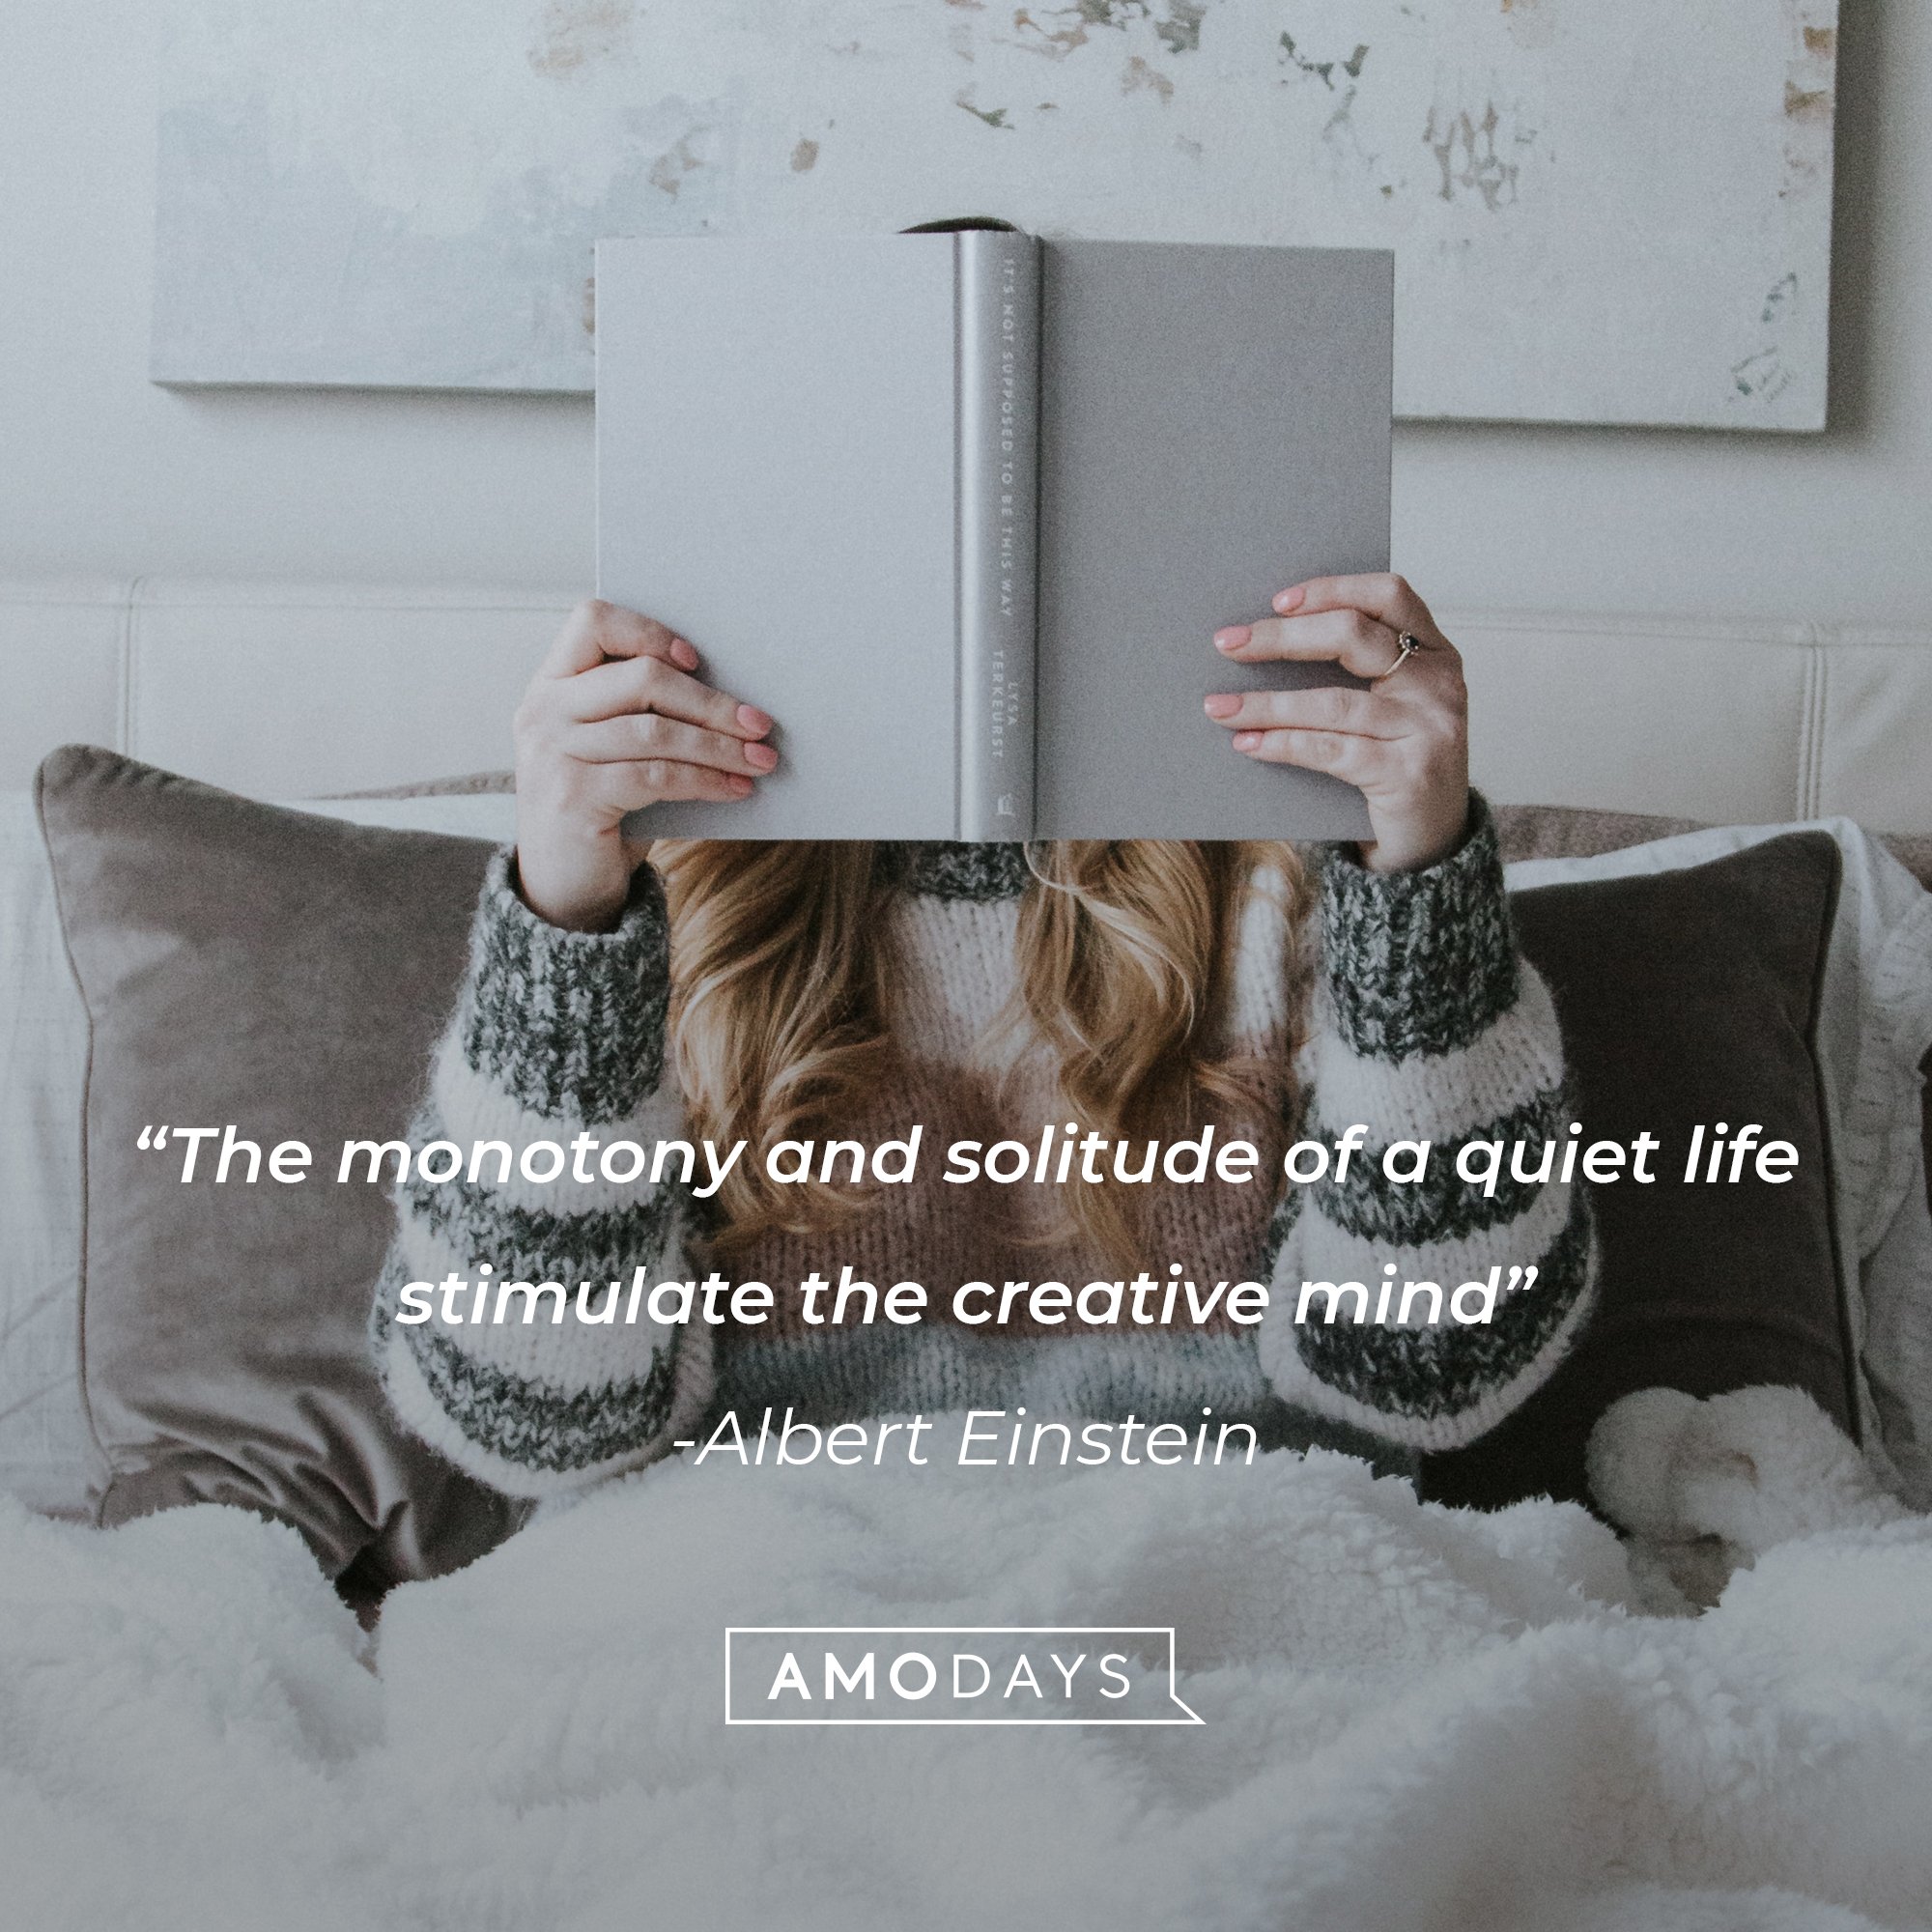  Albert Einstein's quote: “The monotony and solitude of a quiet life stimulate the creative mind.” | Image: AmoDays